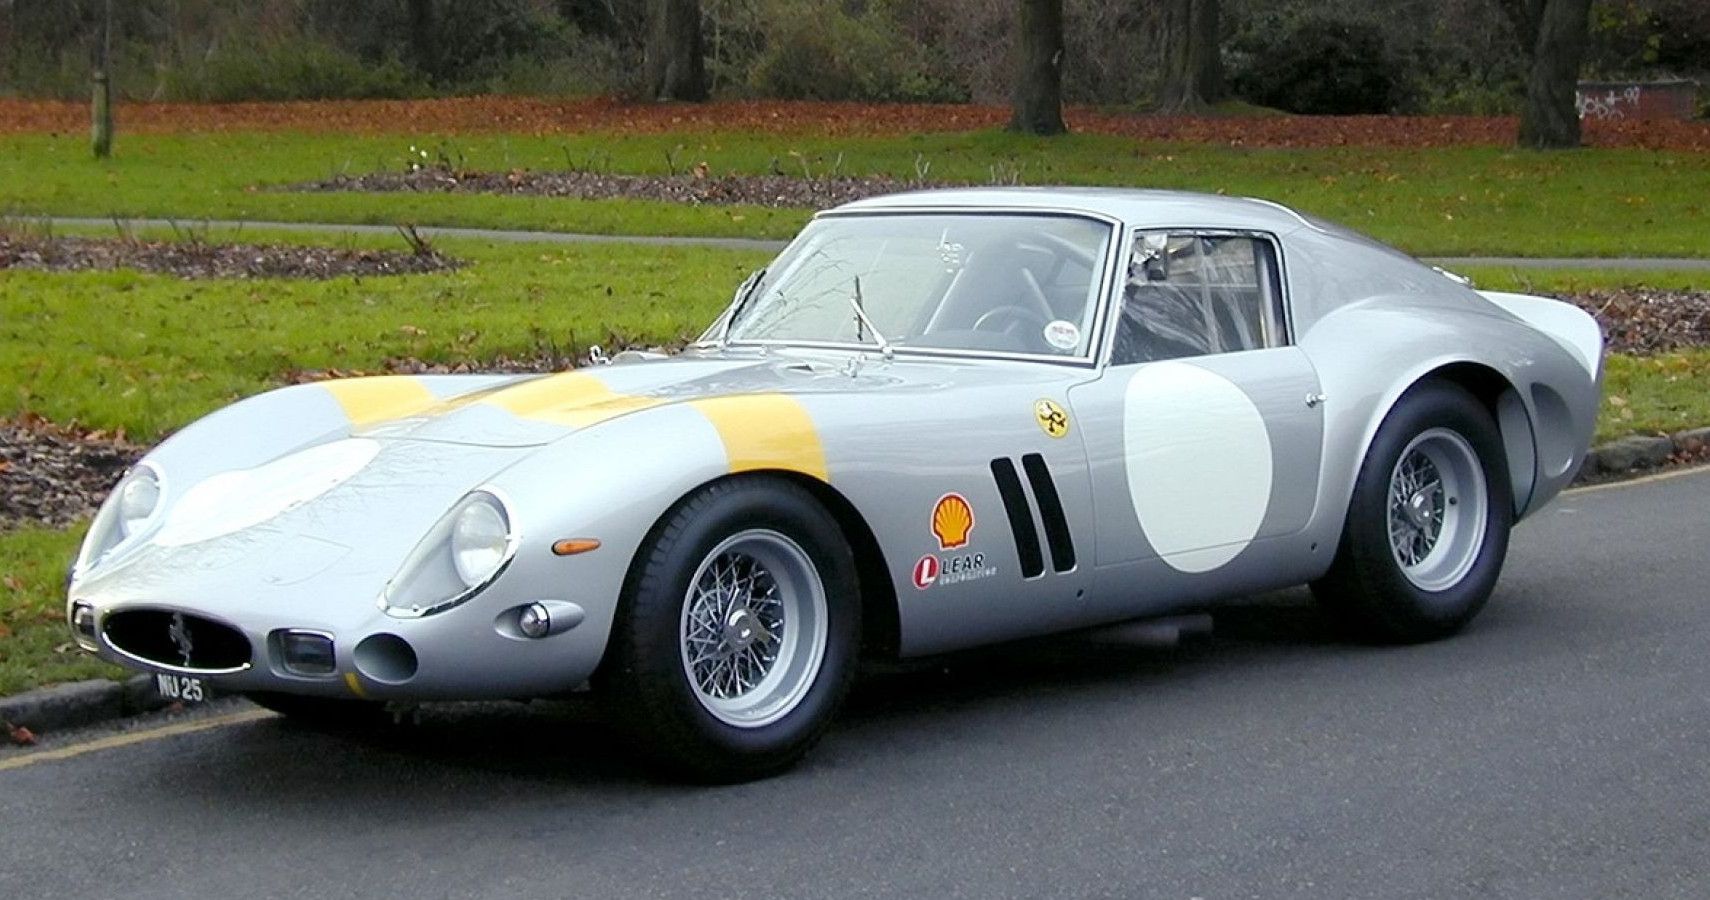 The 250 GTO became the most expensive car ever in a private sale in 2018 for $70 million